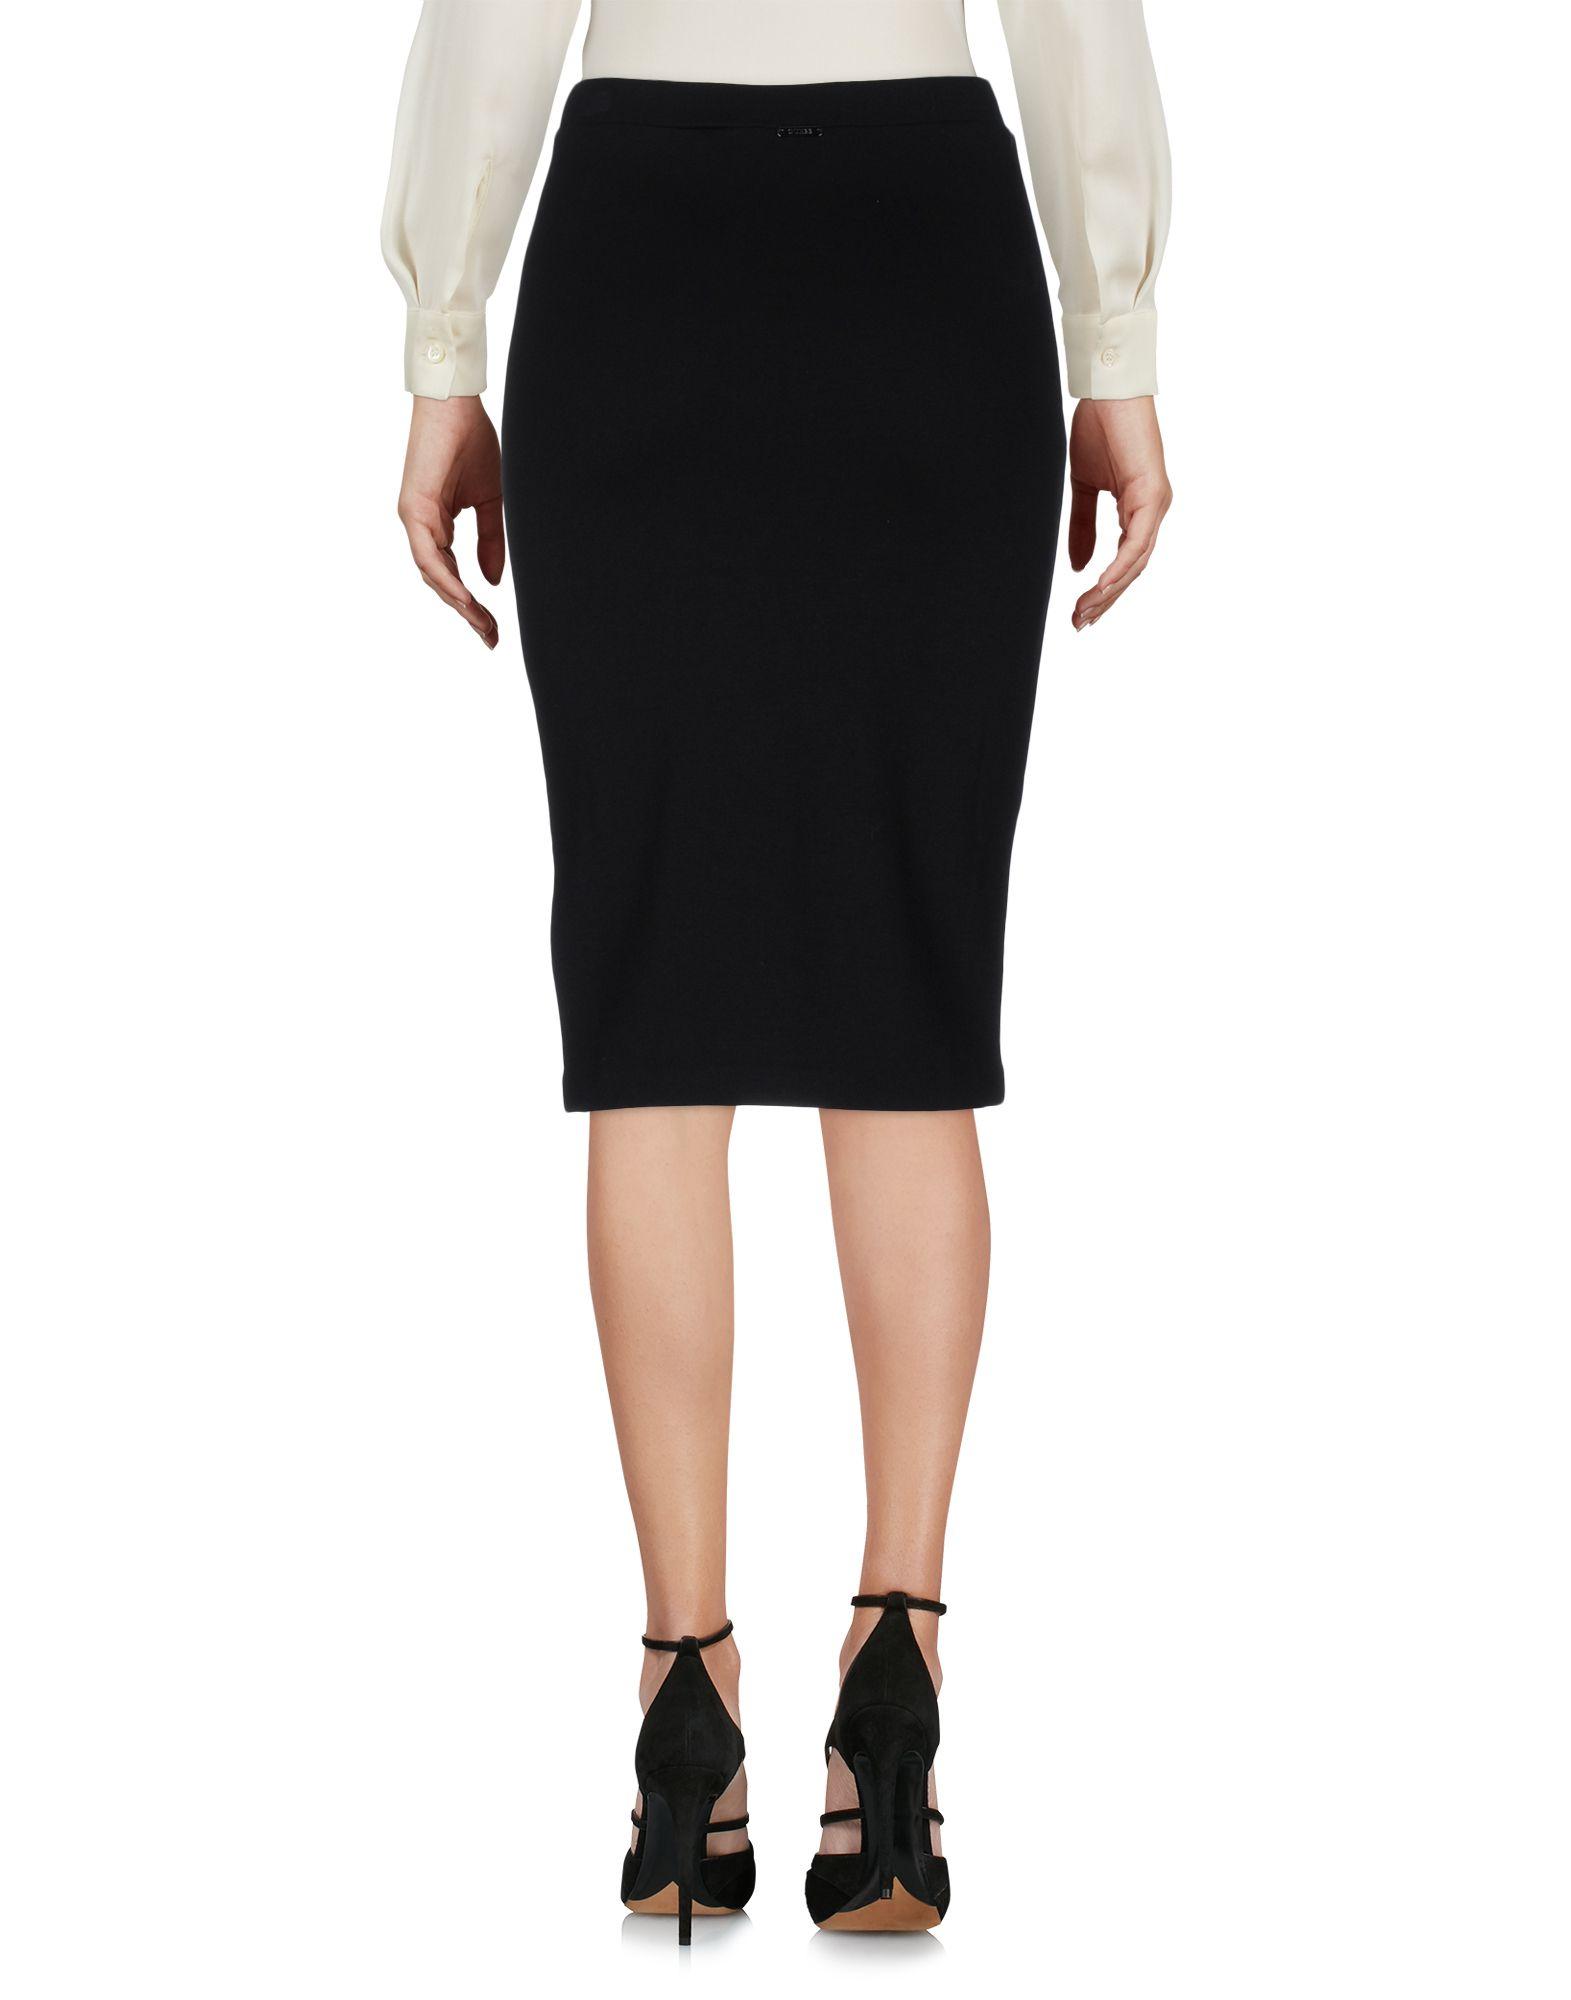 Guess Synthetic Knee Length Skirt in Black - Save 45% - Lyst